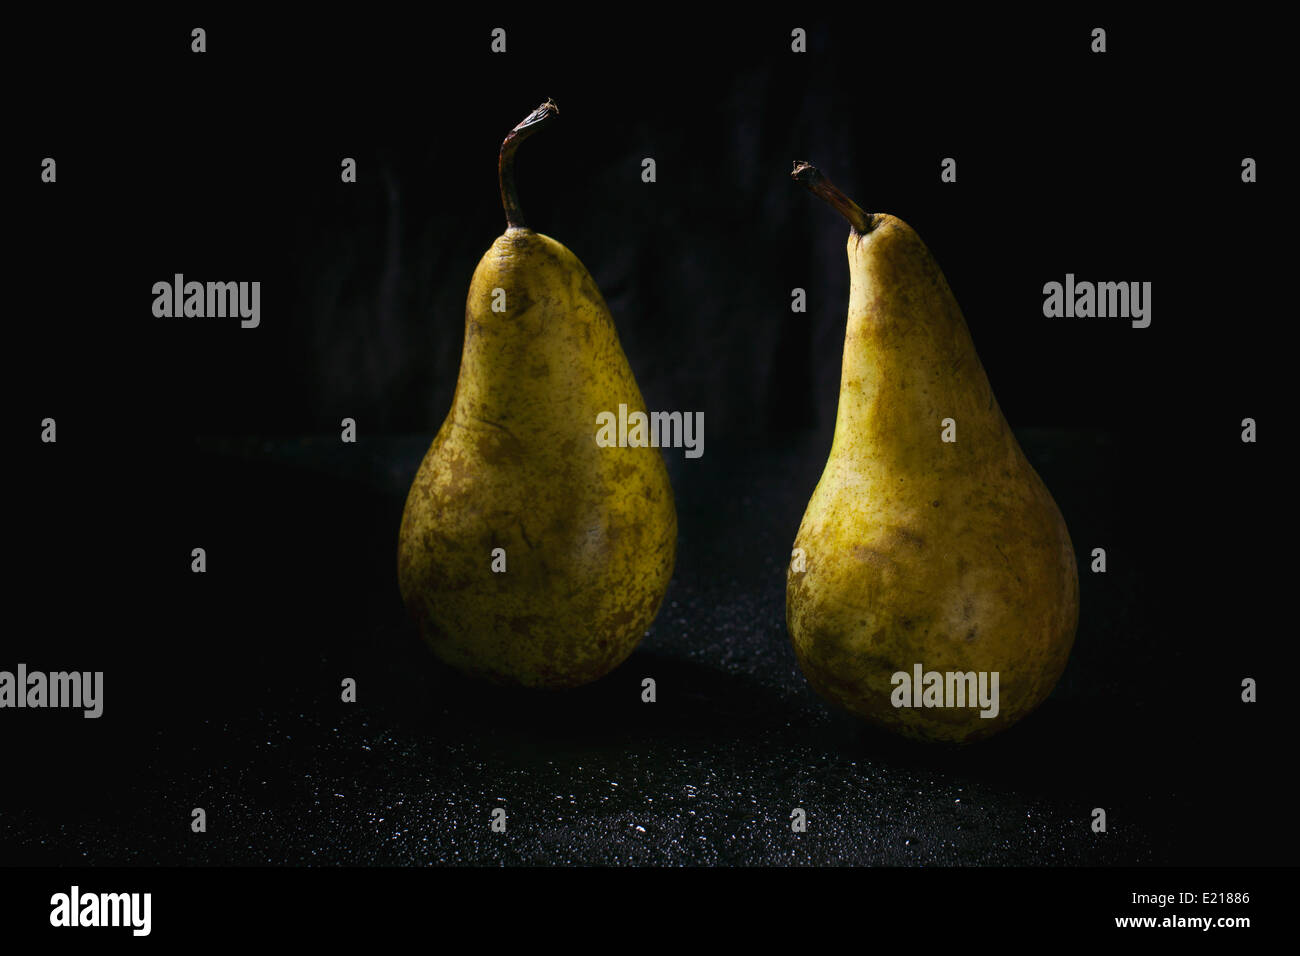 Two pears over wet black background Stock Photo